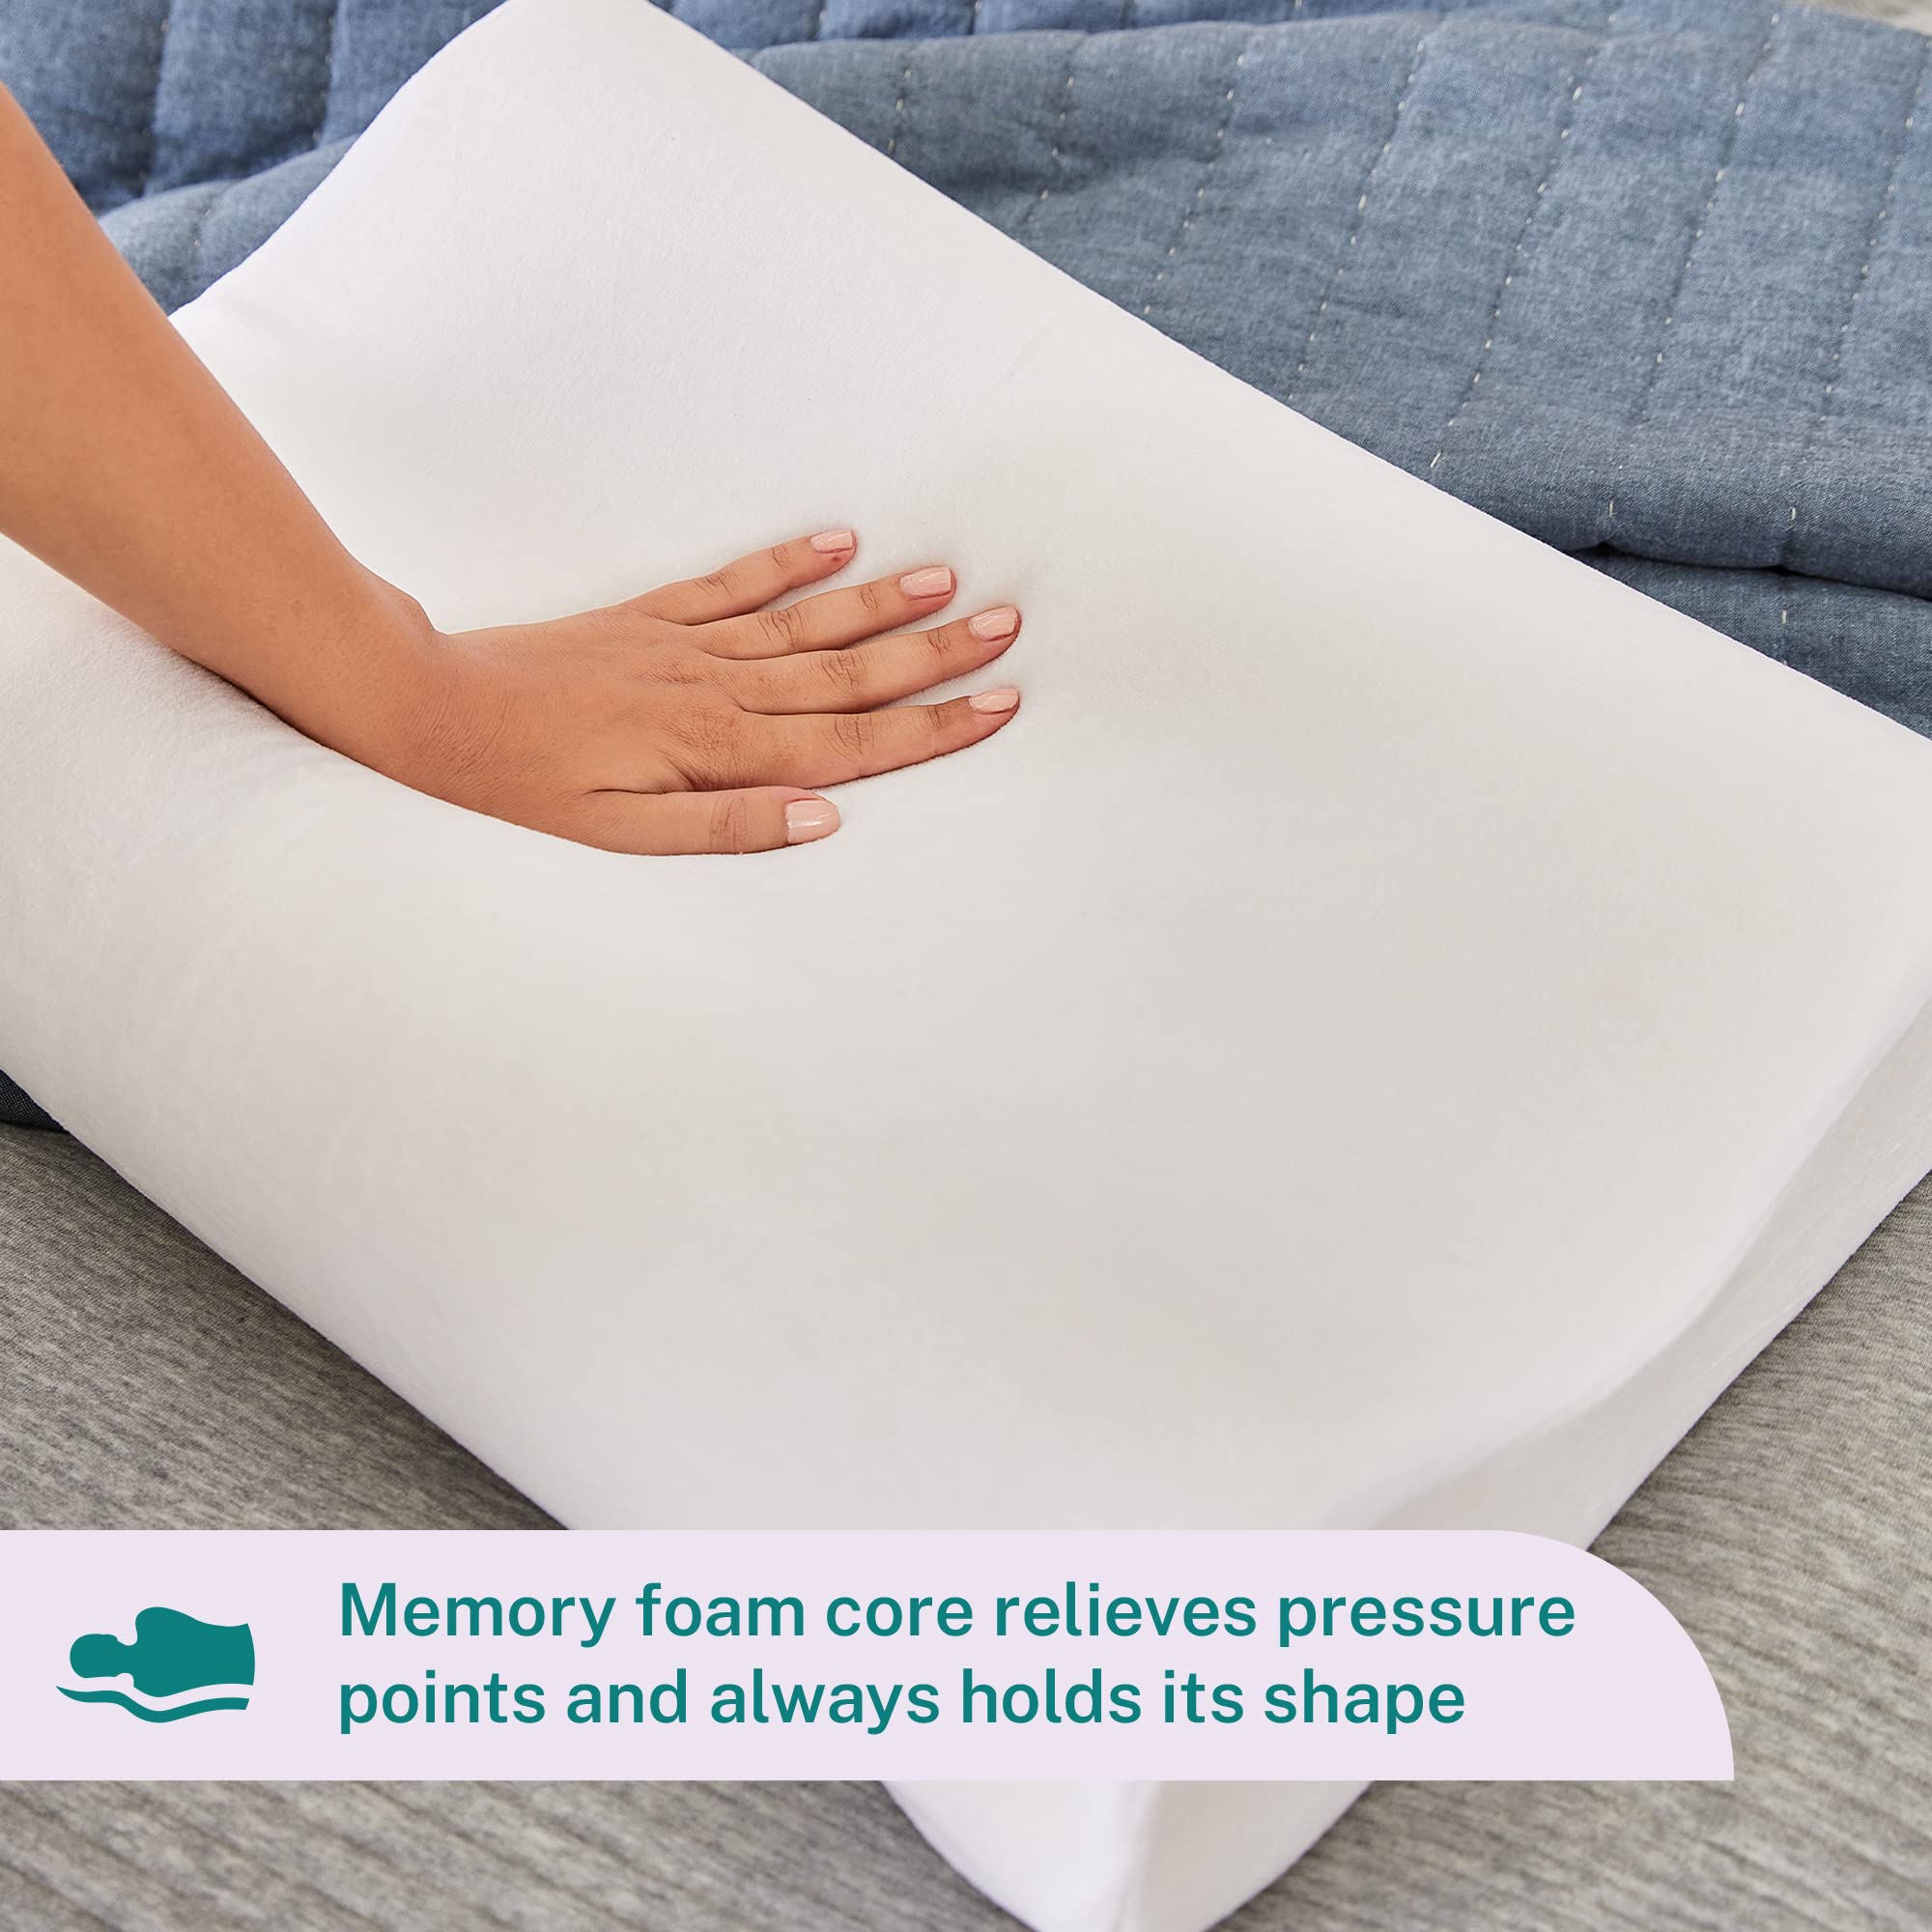 Sleep Innovations Memory Foam Contour Pillow, Queen Size, Head, Neck, and Shoulder Alignment, Side and Back Sleepers, Medium Support